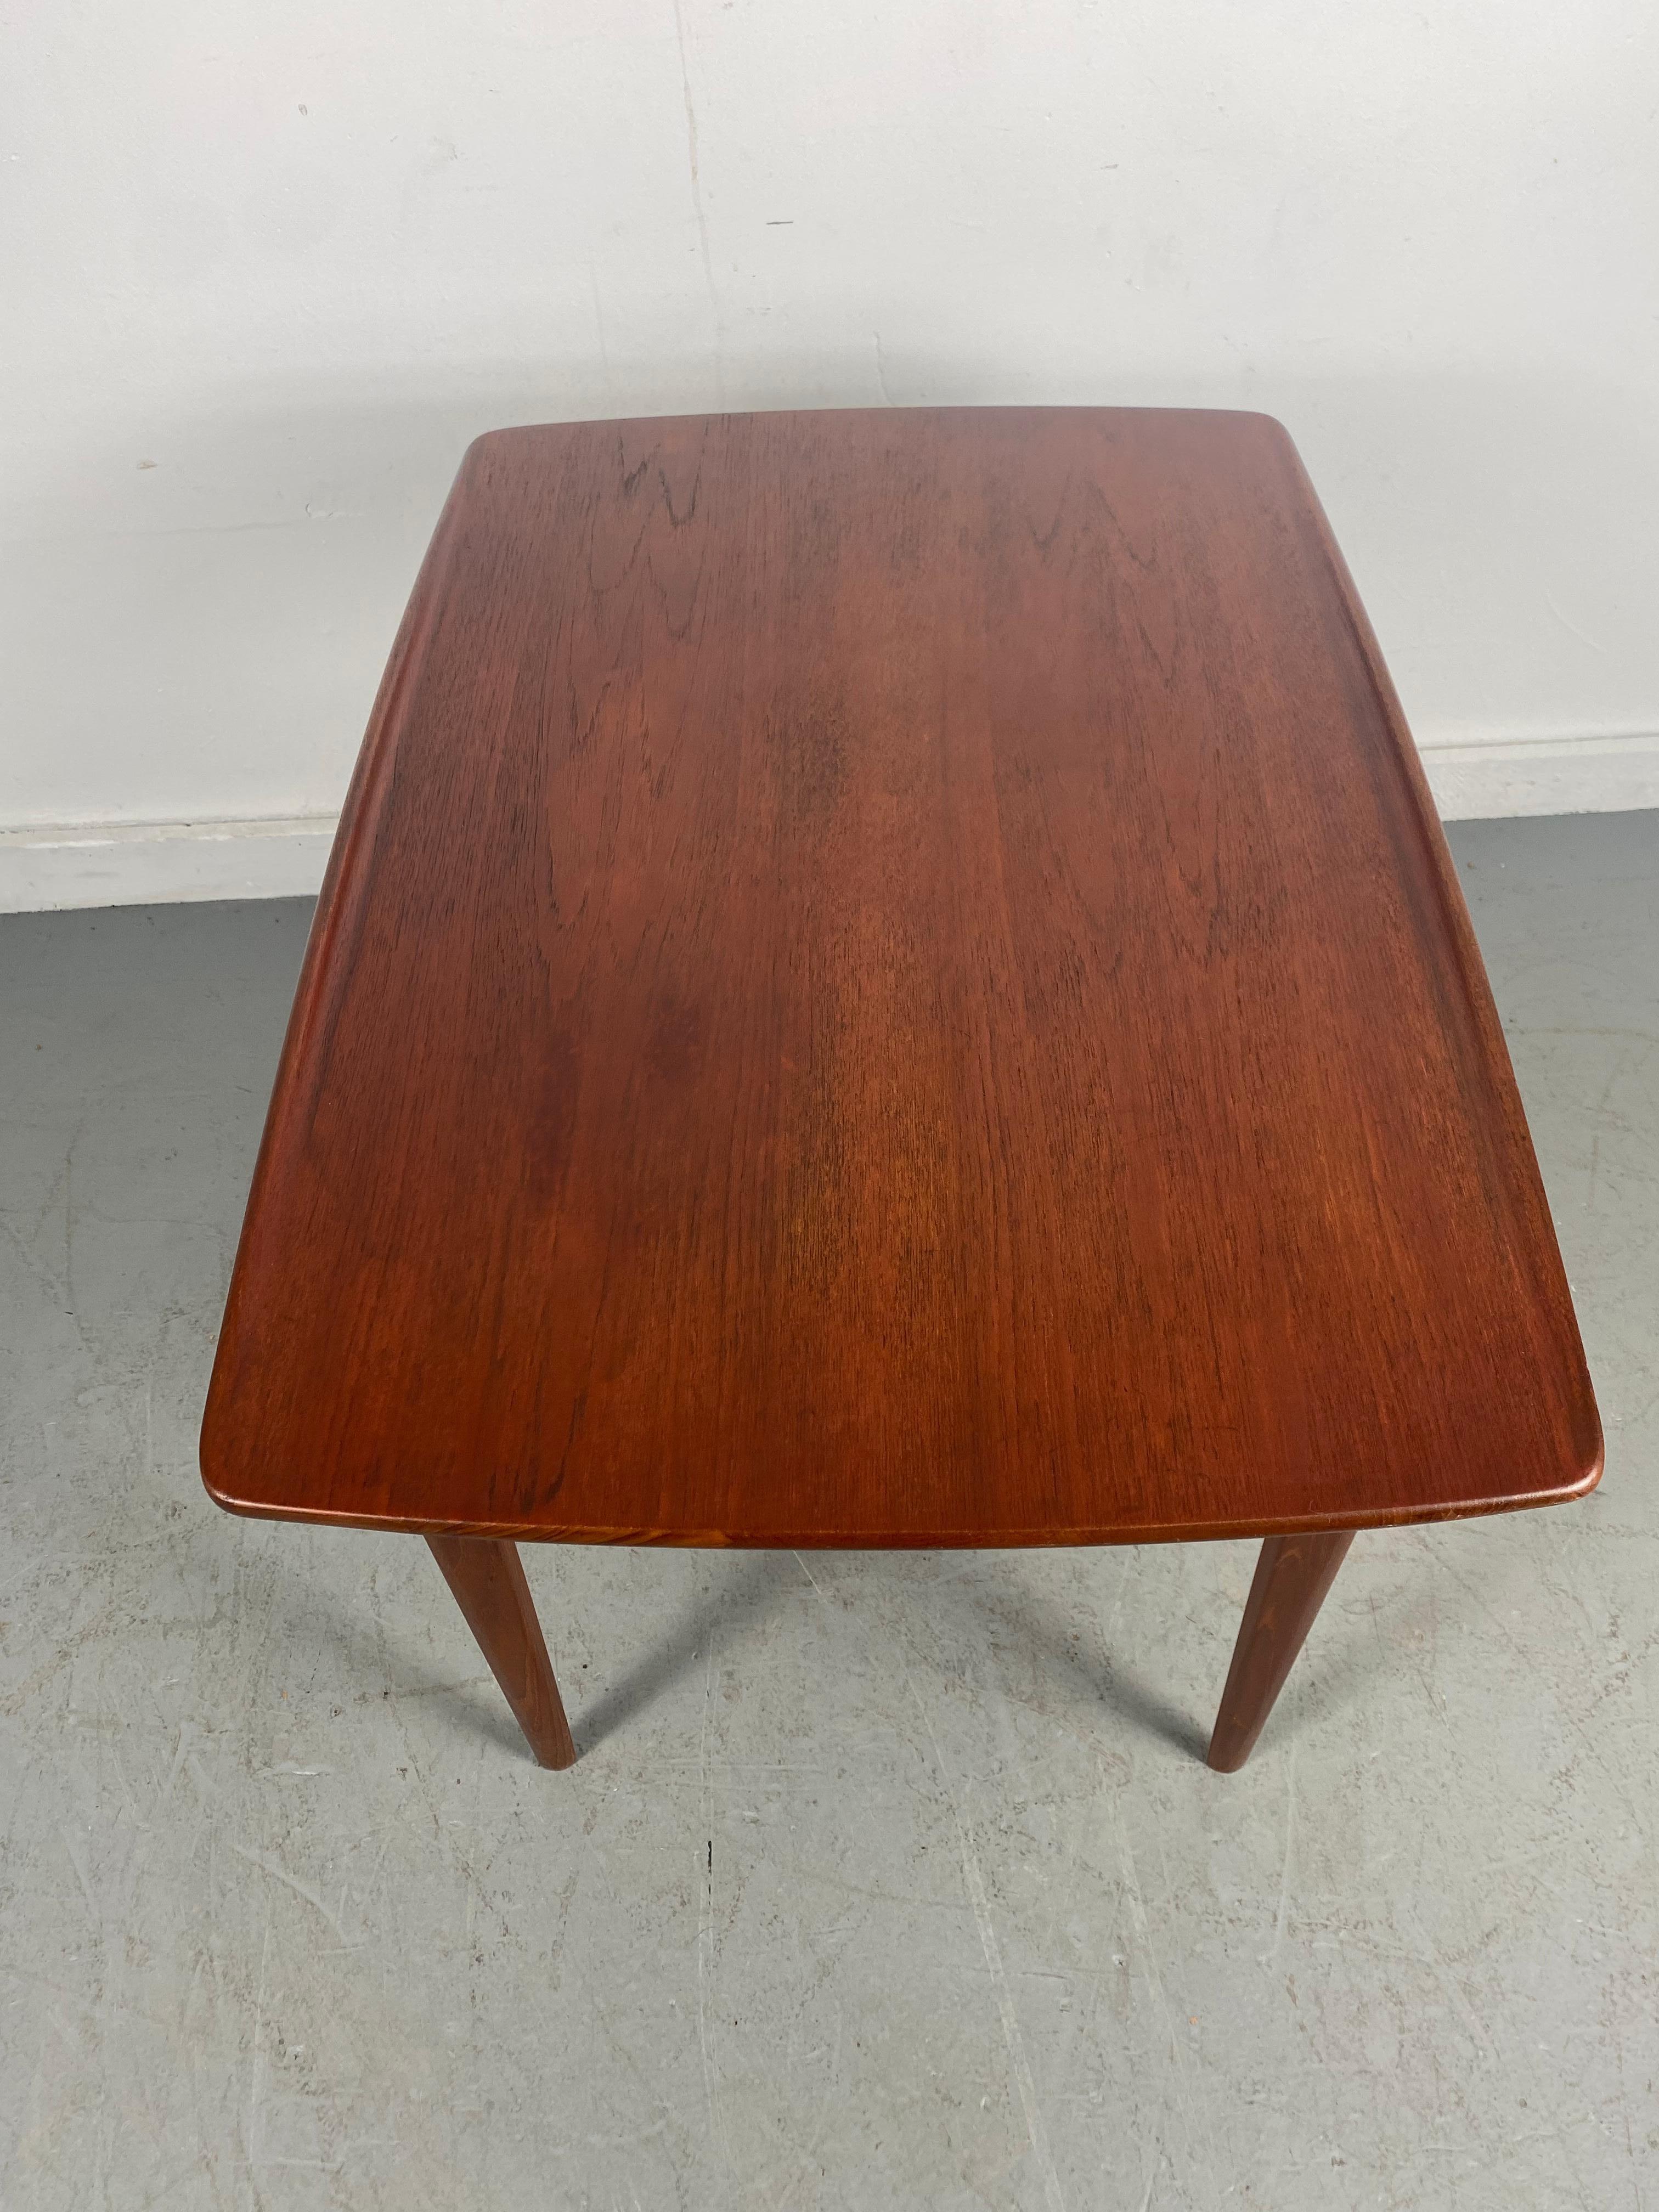 Danish Modern teak table by Finn Juhl for France and Sons,,, Classic Scandinavian modernist design..Retains original France and Sons badge / label.. Superior quality and construction..